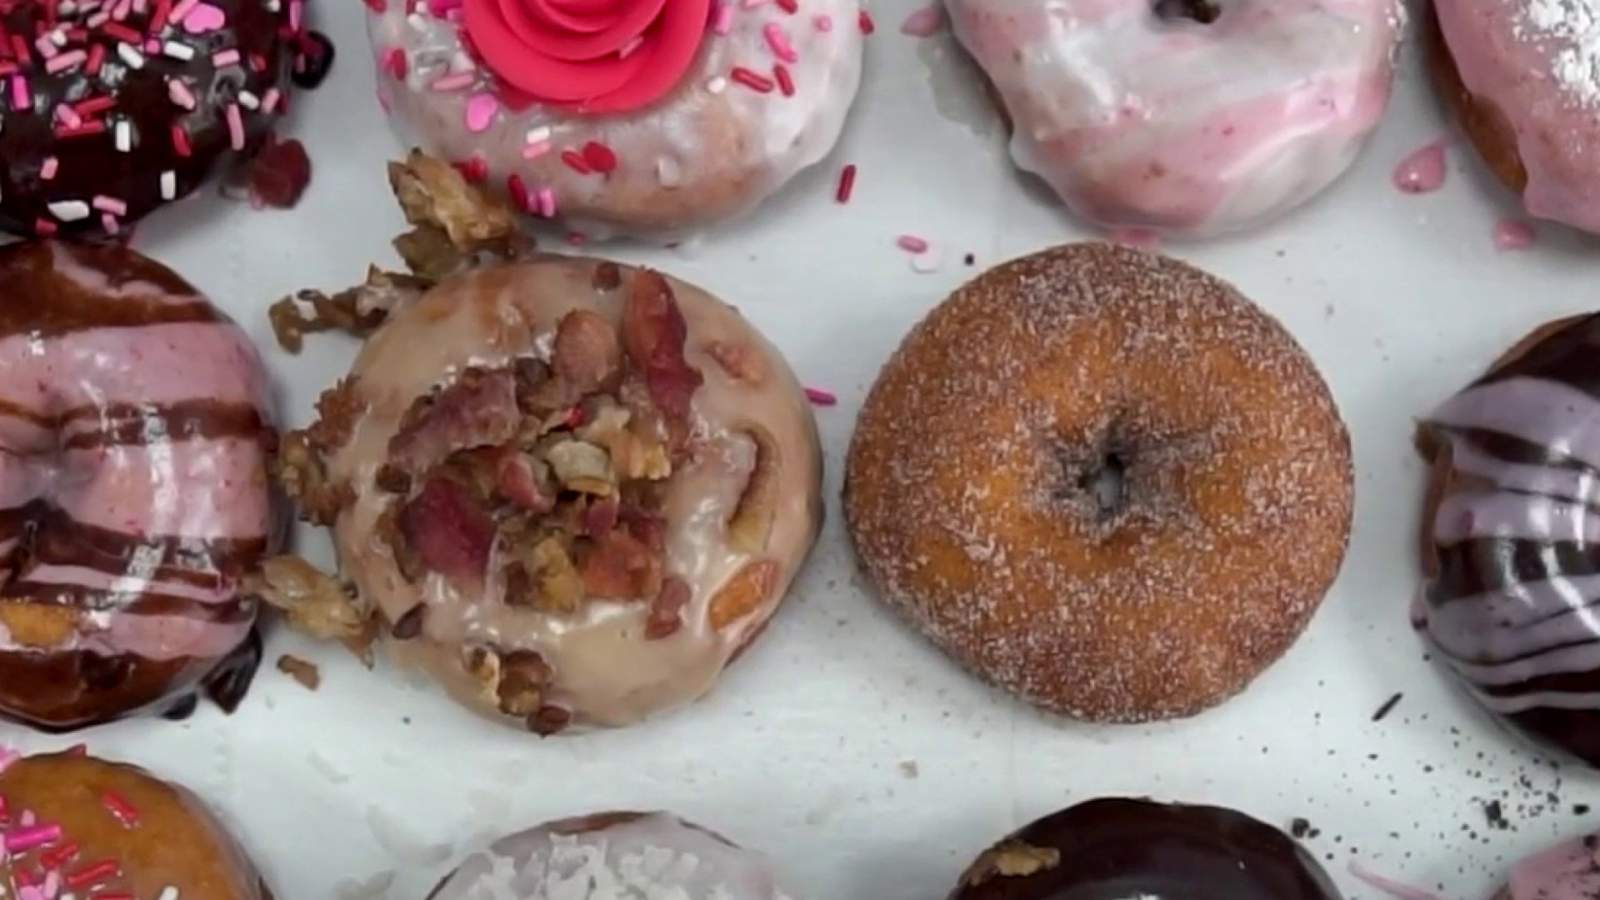 Want a FREE YEAR of donuts? We’ll explain!